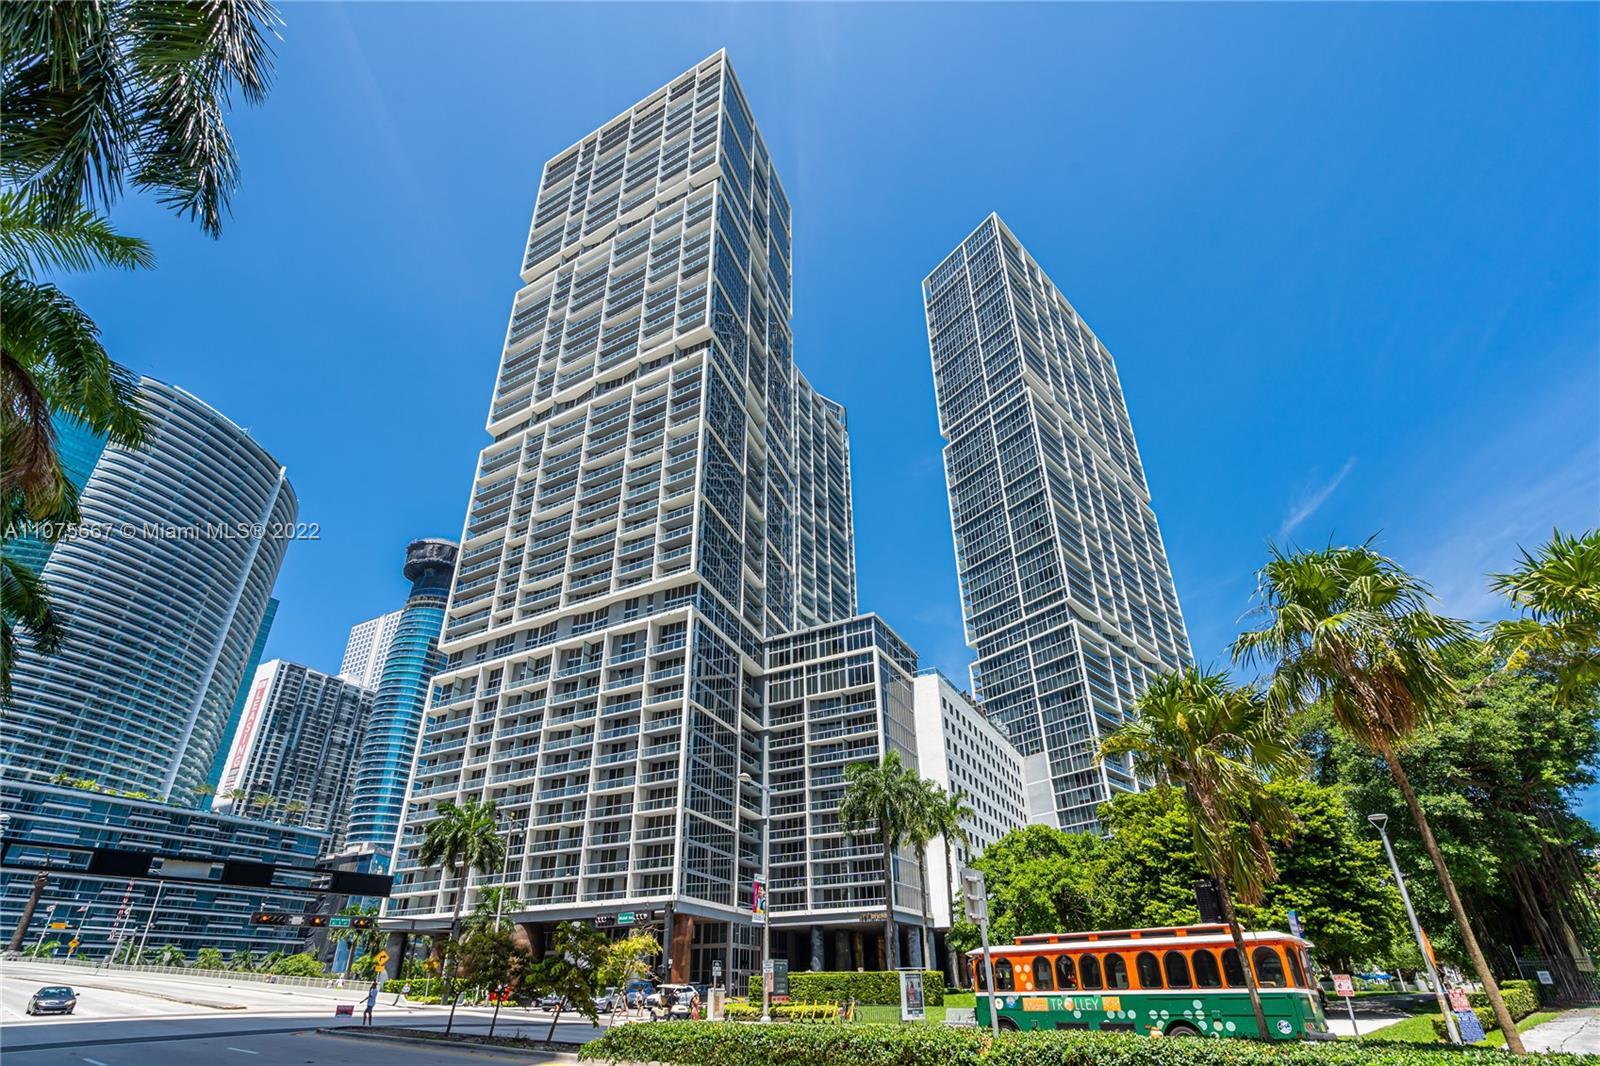 Two-bedroom two-bath. Live in the heart of Brickell walking distance to all restaurant and more... B